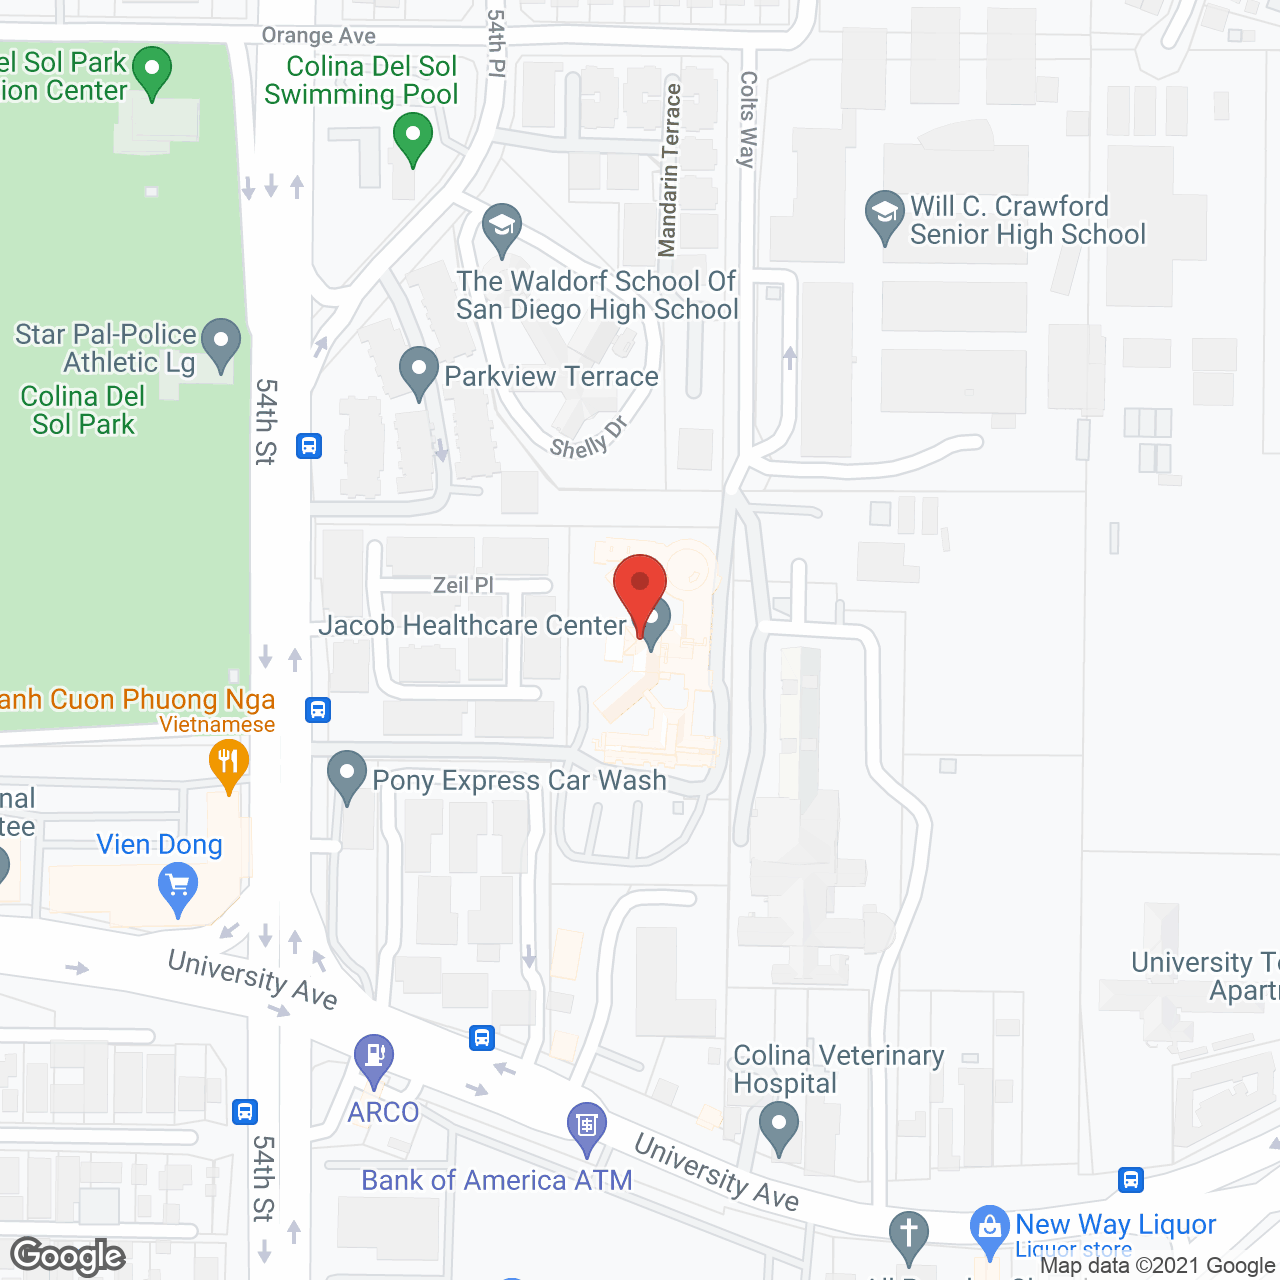 Jacob Health Care Ctr in google map